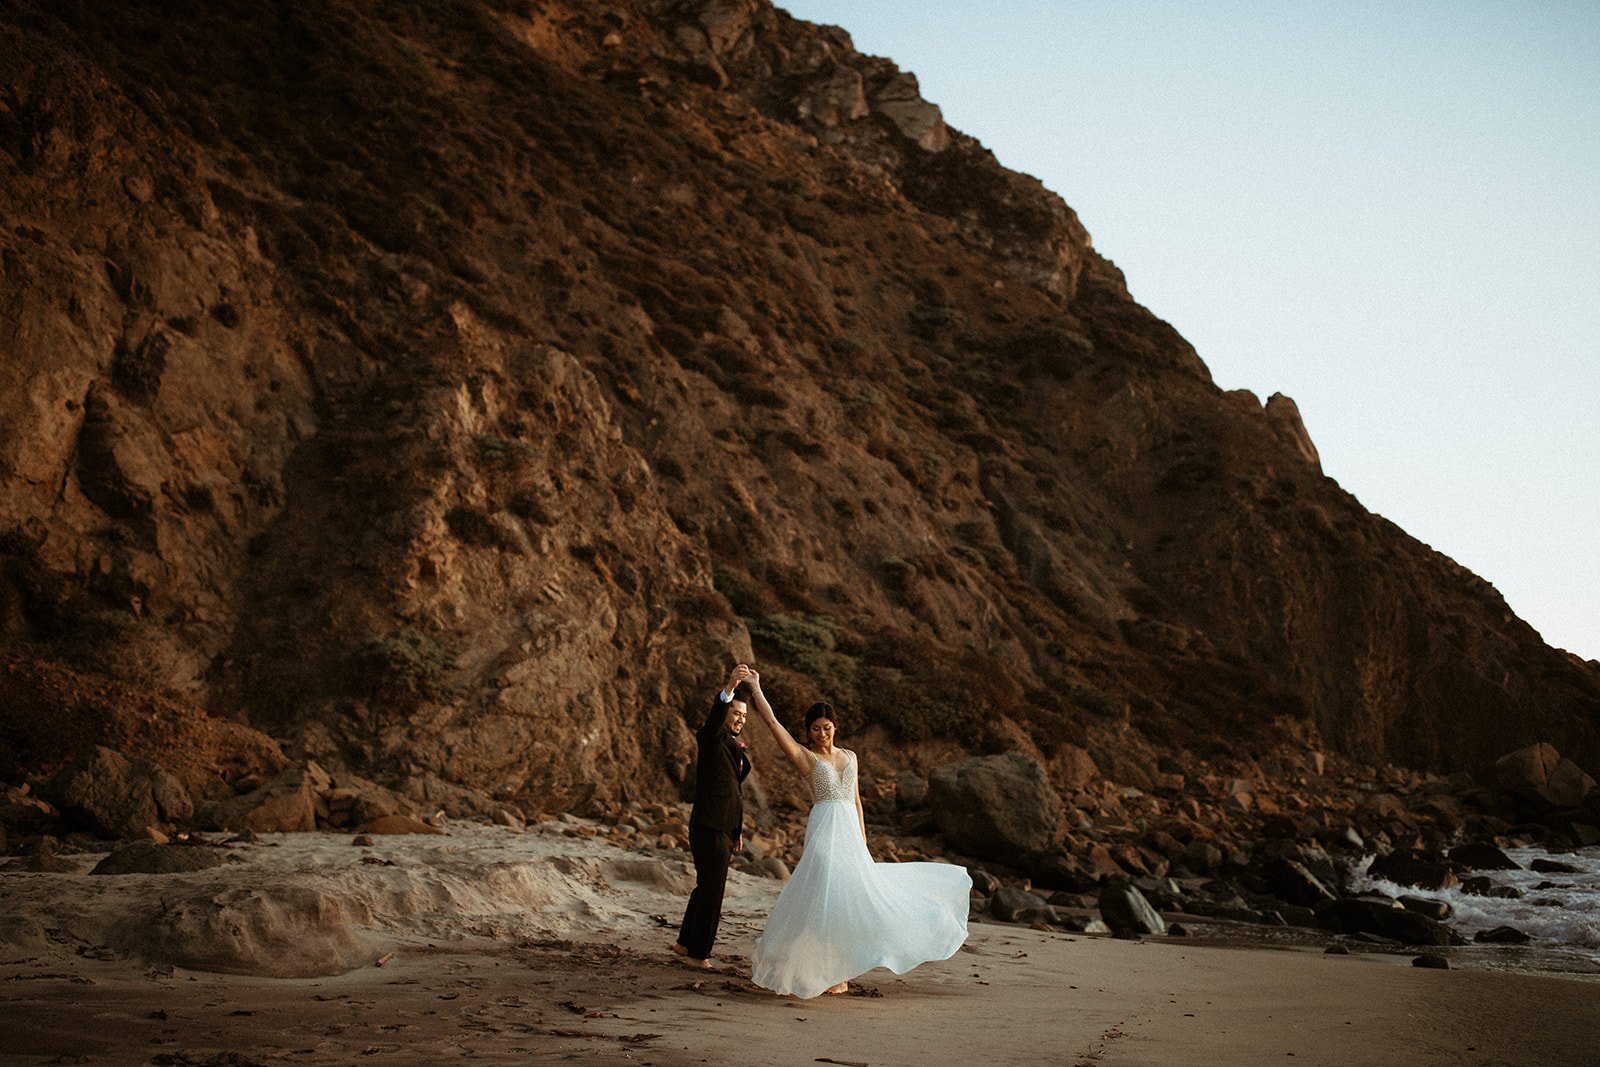 46-How-to-elope-in-Big-Sur-by-Will-Khoury.jpg